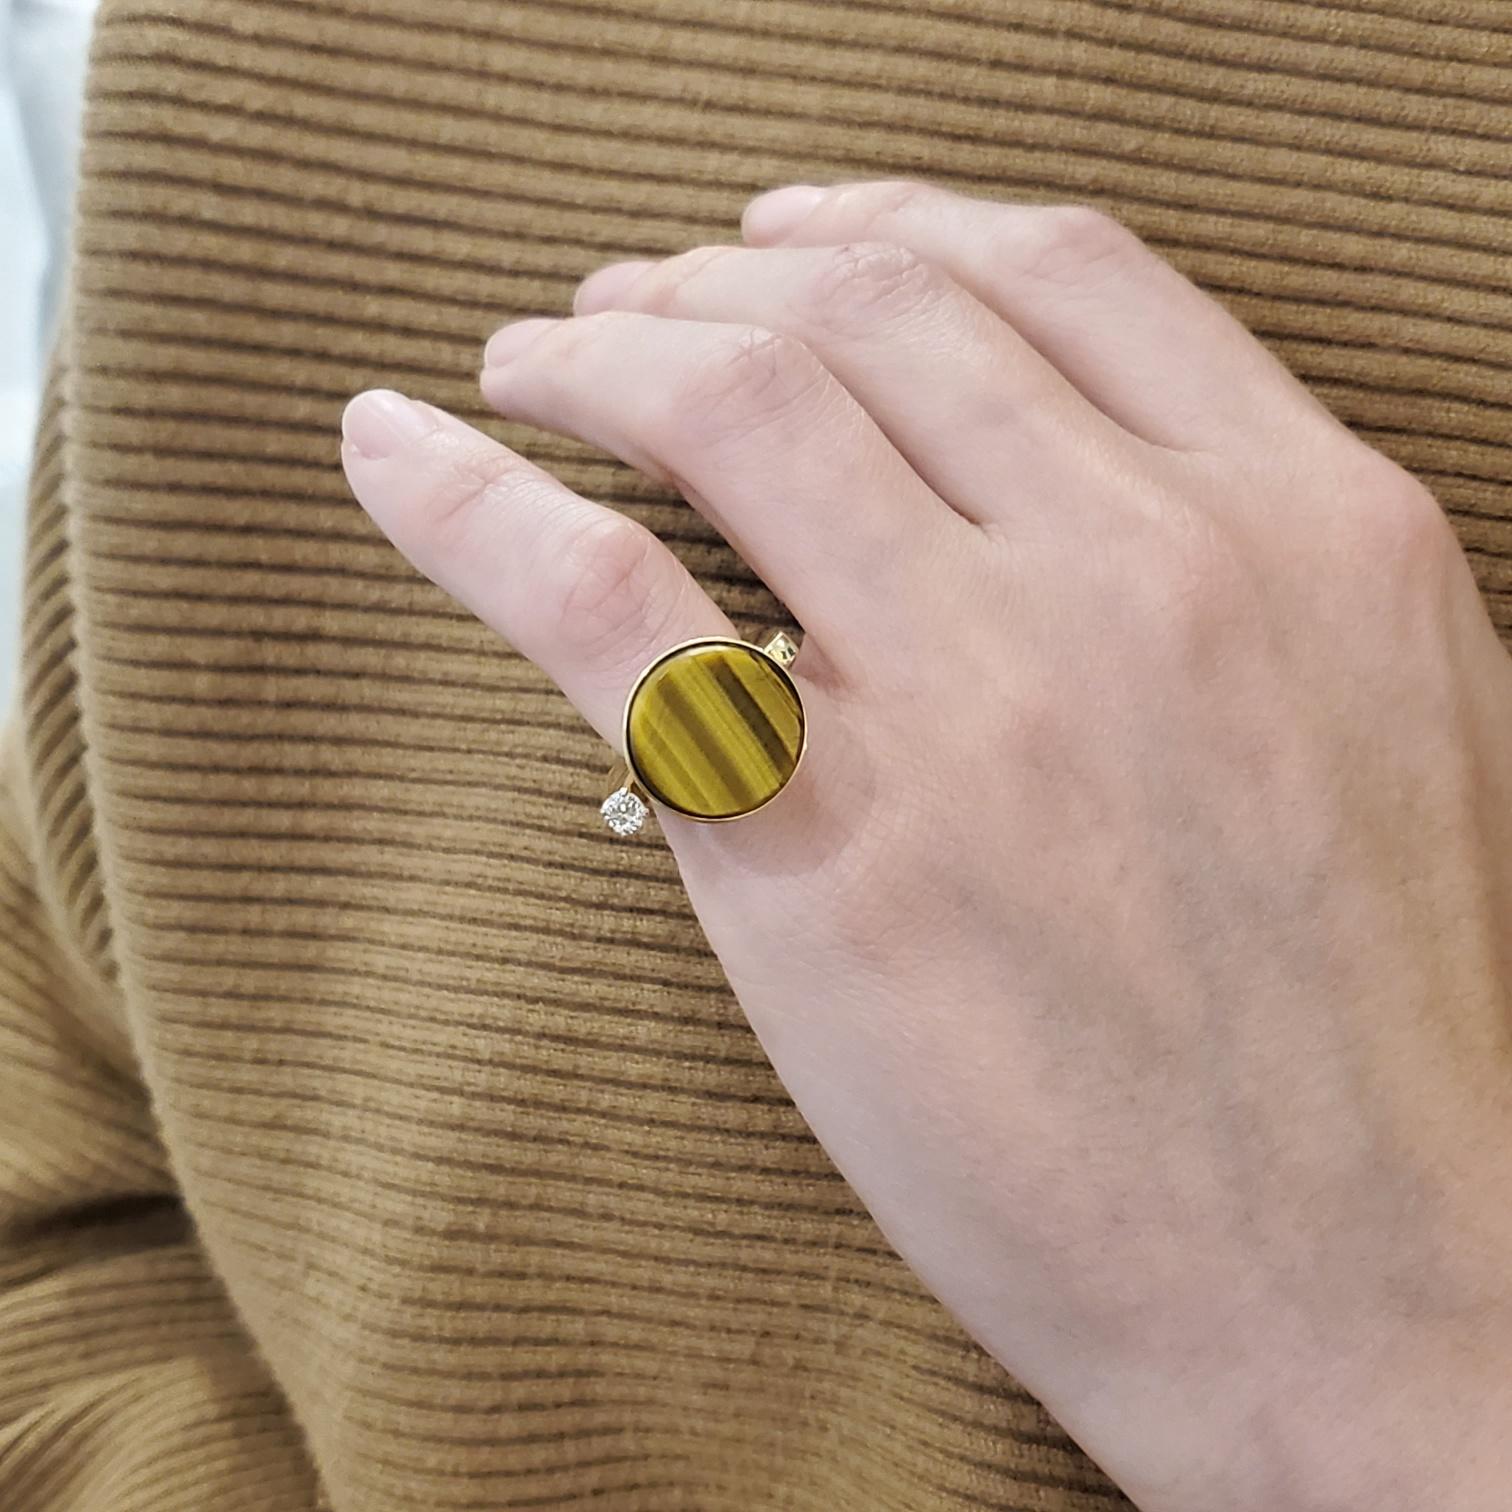 Geometric Retro Modernist 1970 Sculptural Ring in 14kt Gold with Tiger Quartz In Excellent Condition For Sale In Miami, FL